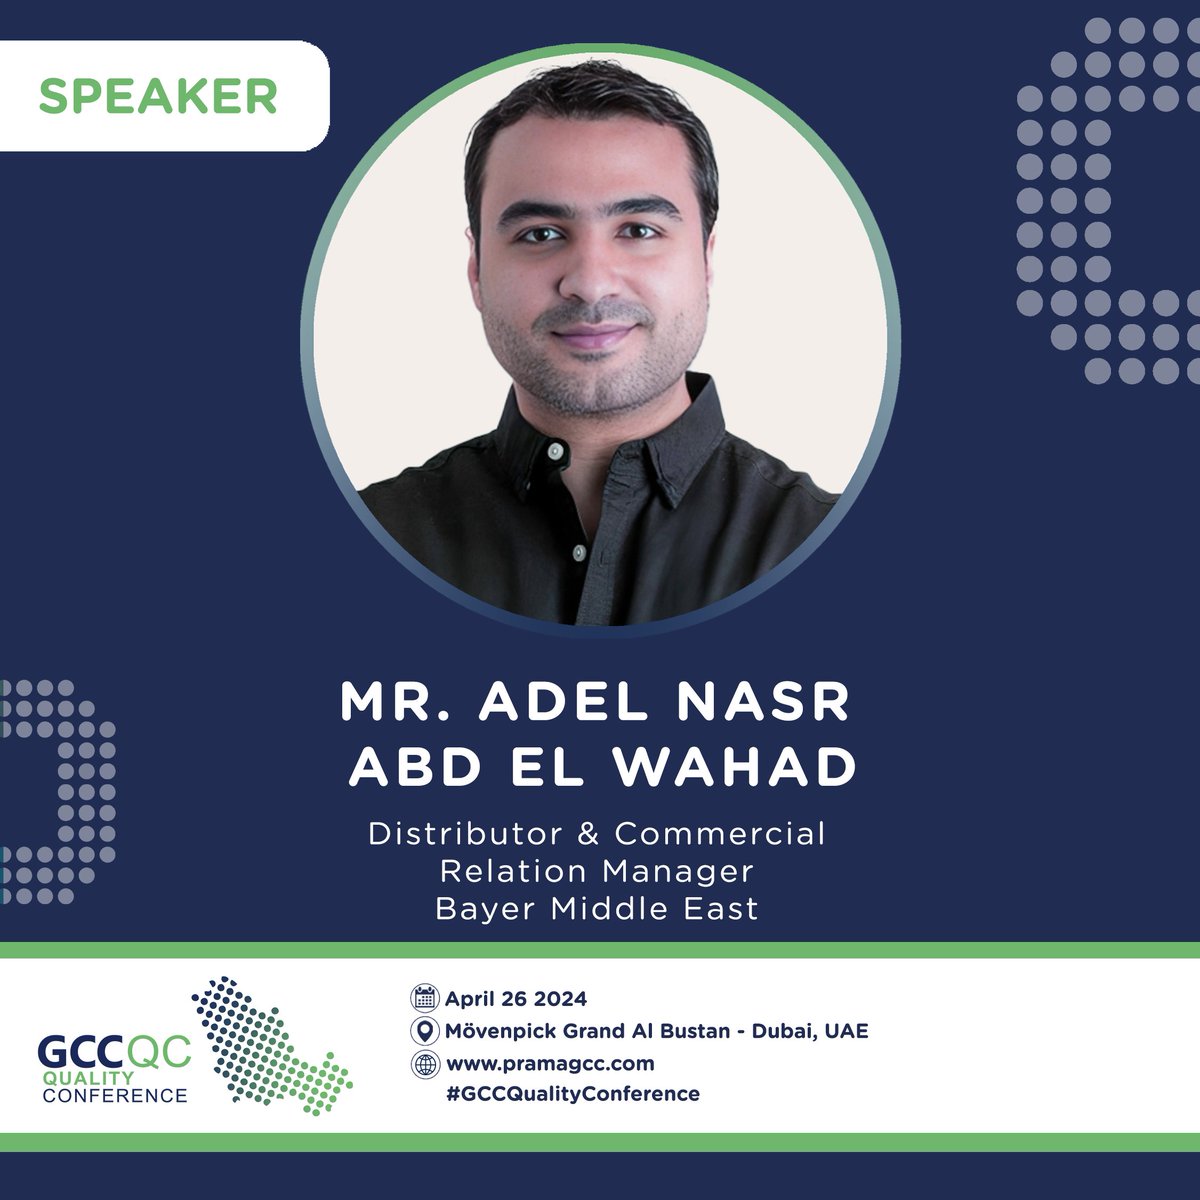 The #GCCQualityConference 2024 welcomes Mr. Adel Nasr, Distributor & Commercial Relation Manager - #Bayer Middle East , who will be joining as a speaker!

pramagcc.com/qc

#GCCQC #Healthcare #GCC #qualityassurance #qualitymanagement #qualityassurance #pharmaceutical #UAE